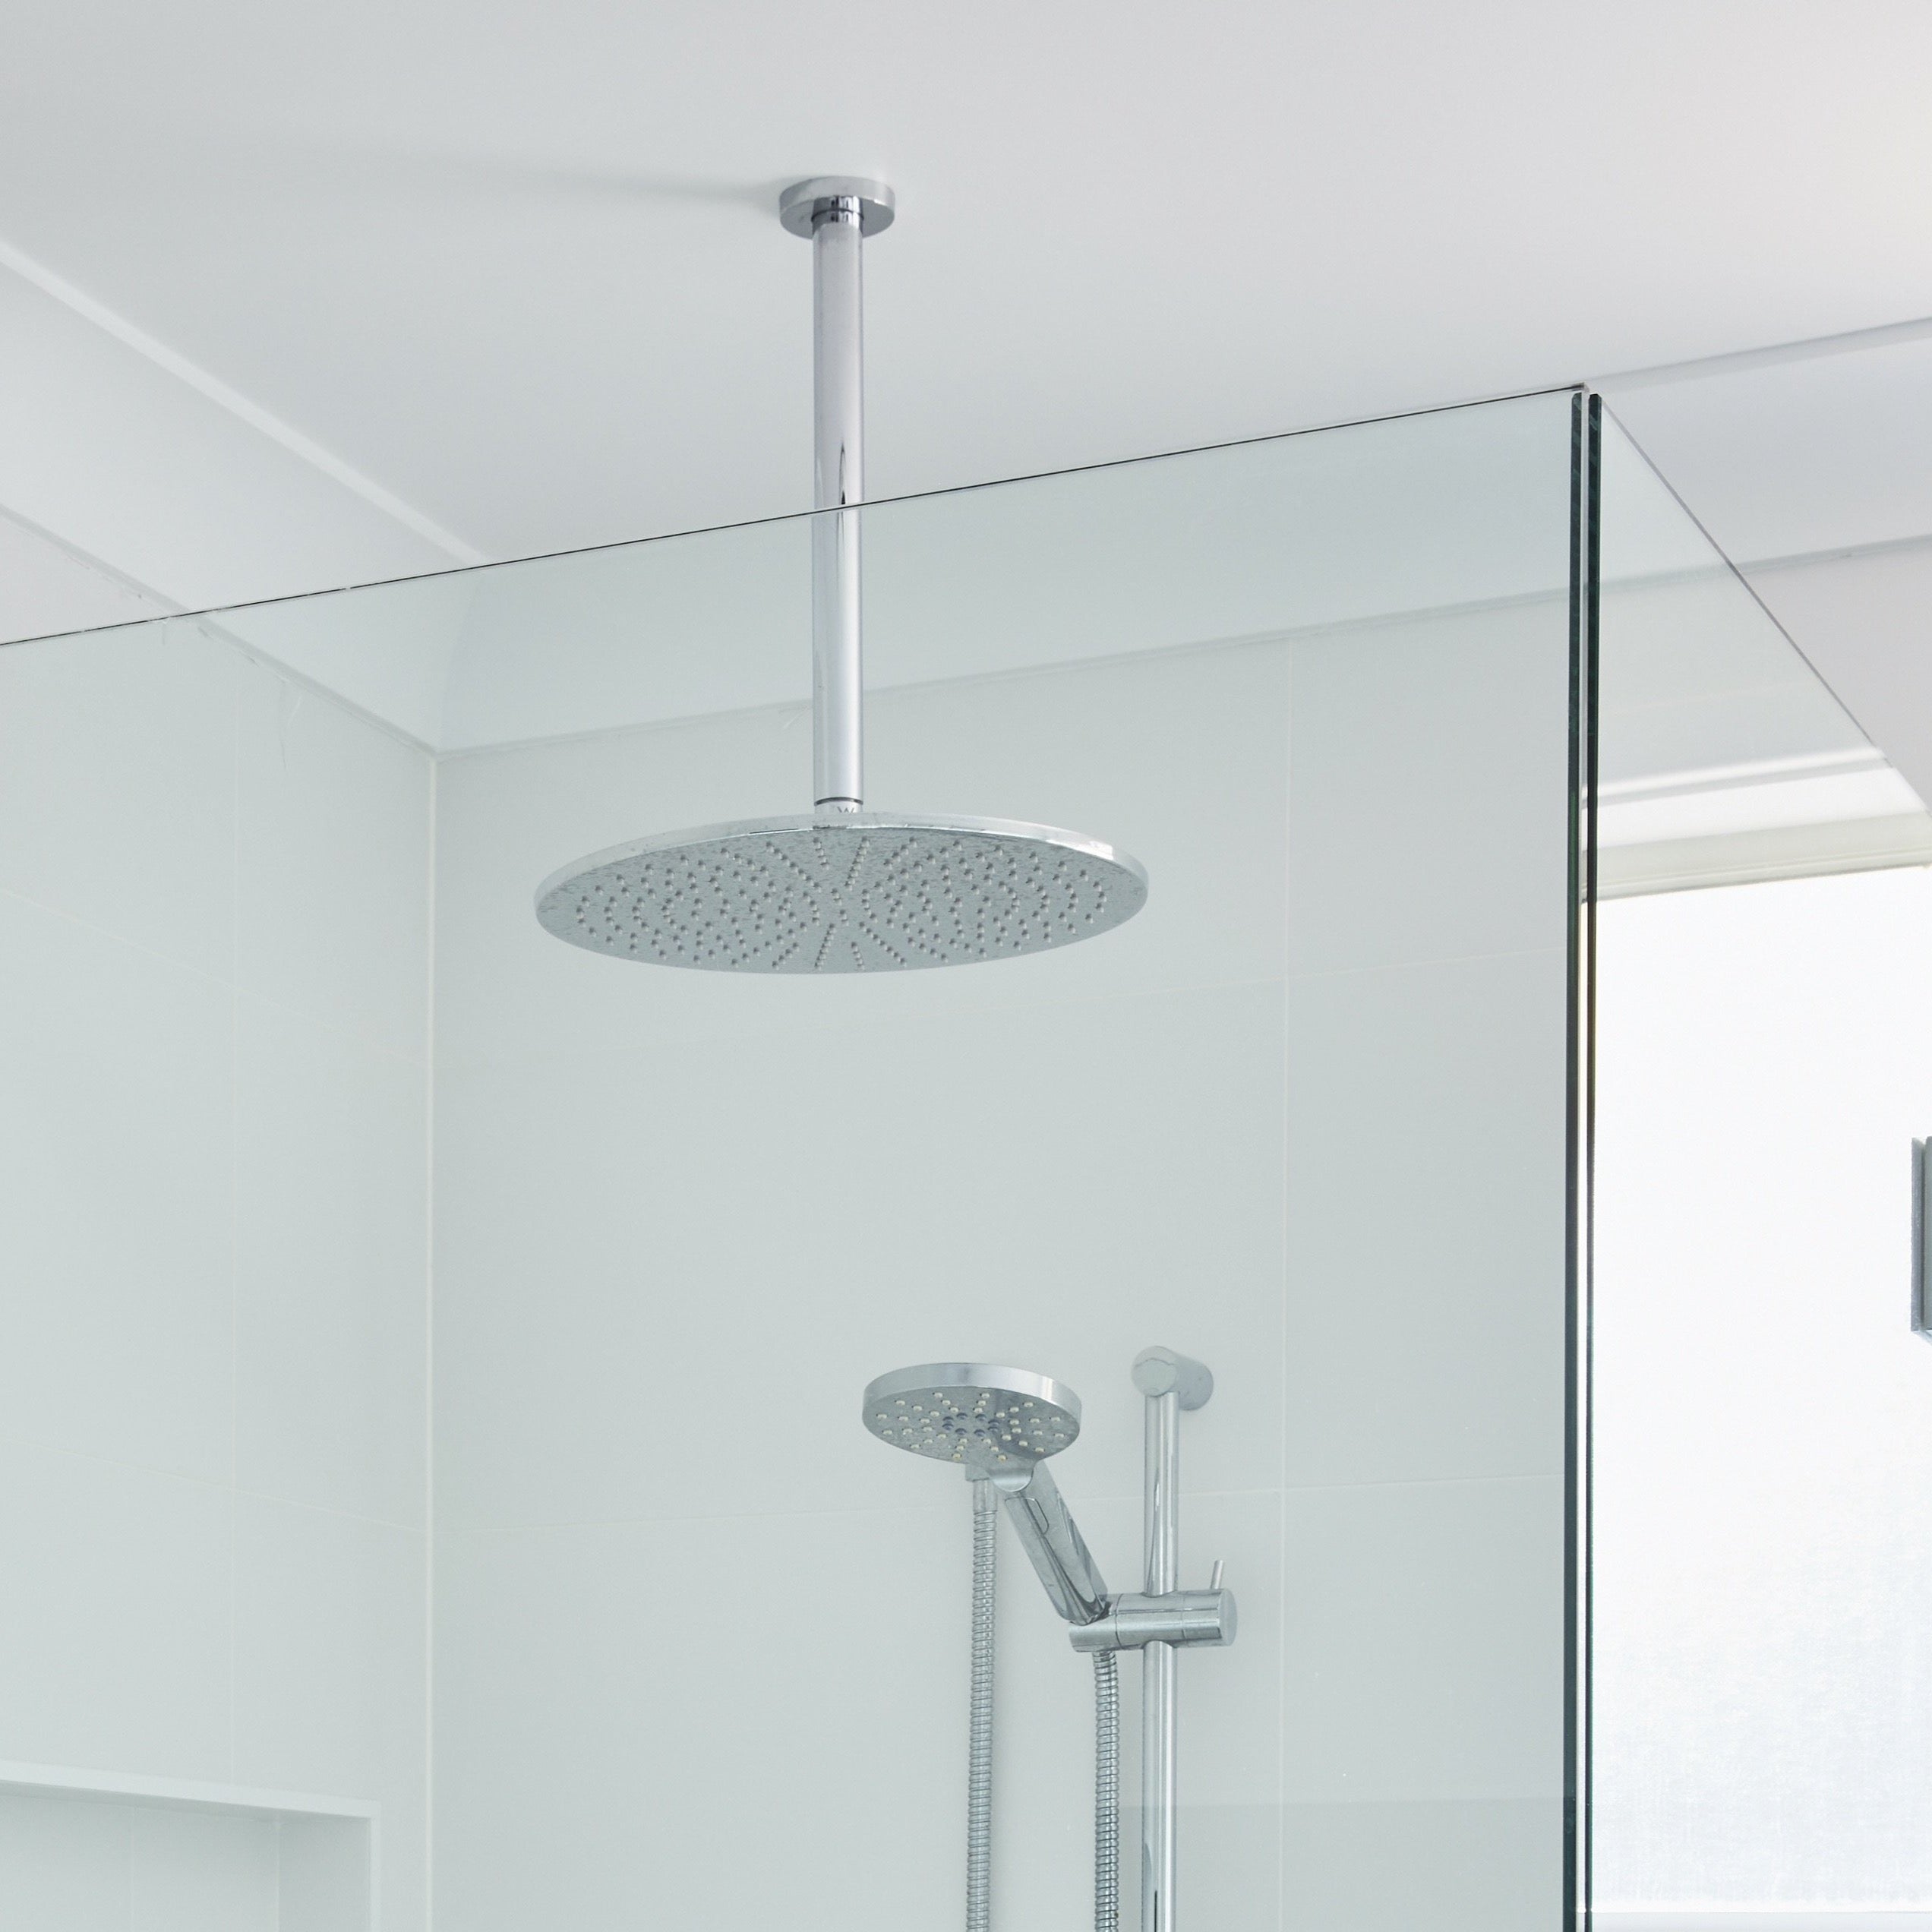 Daintree Ceiling Mounted Shower Arm Round 200mm in Brushed Gunmetal